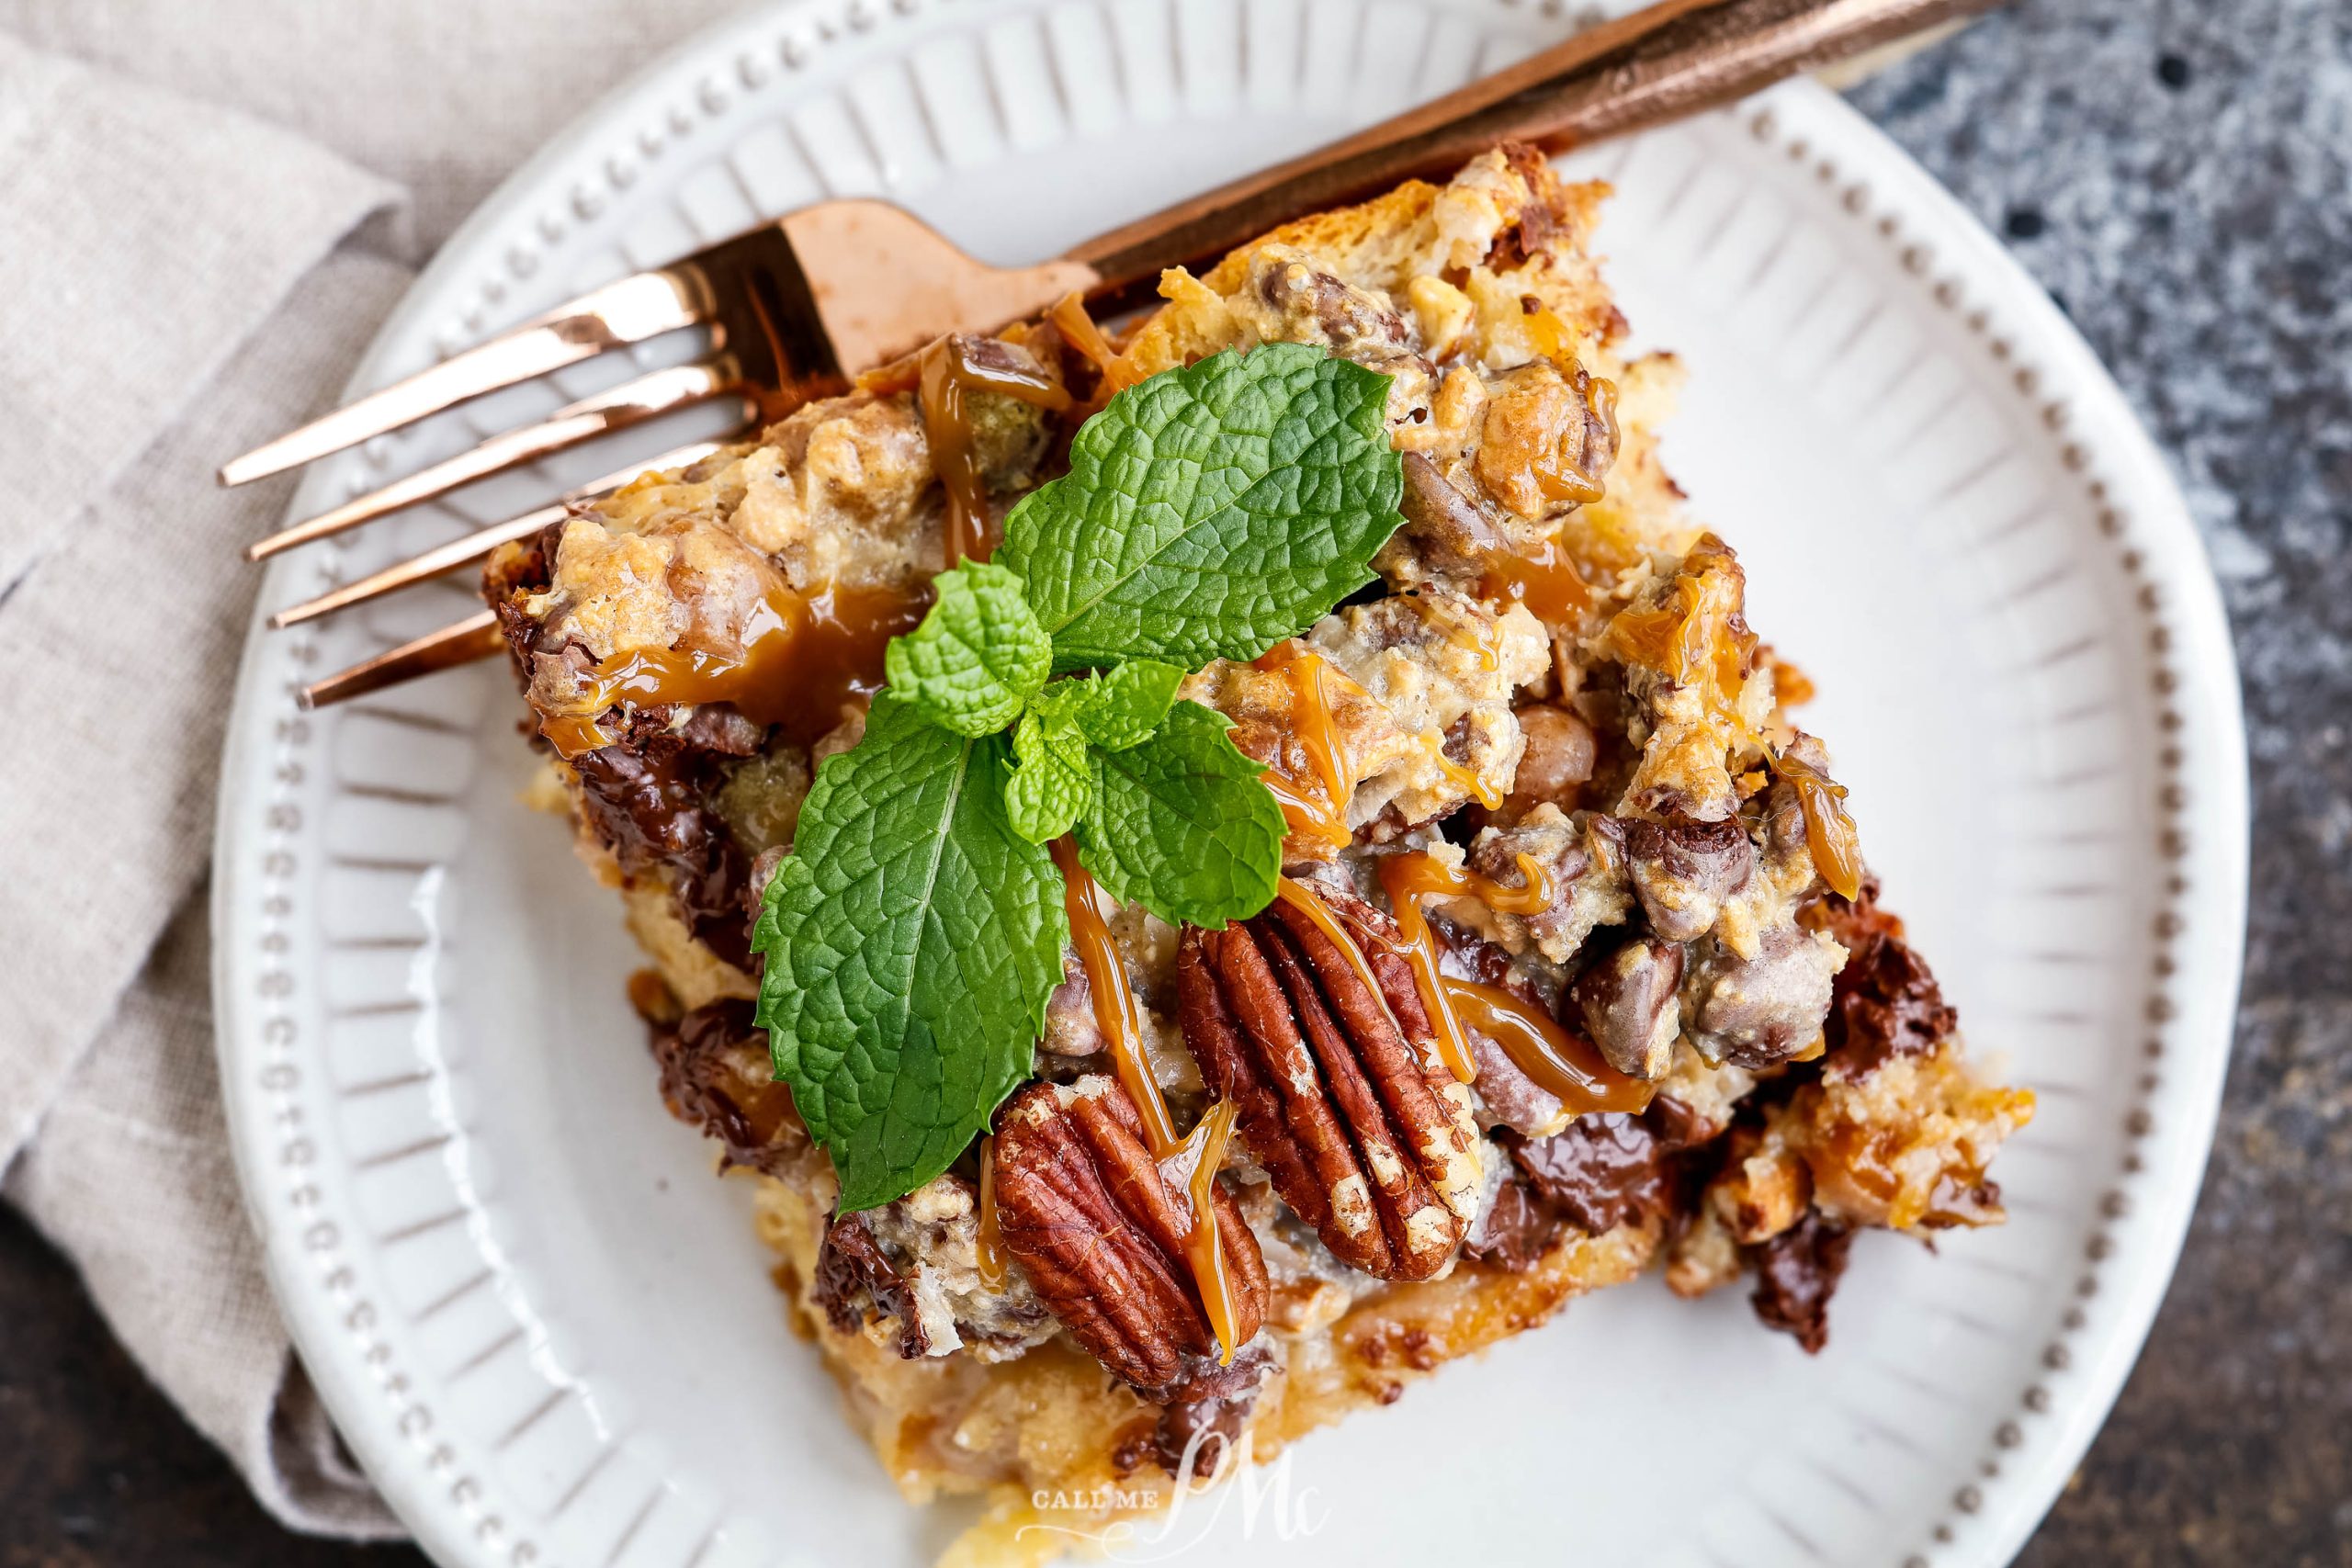 Flat lay of bread pudding topped with pecans and mint for garnish.